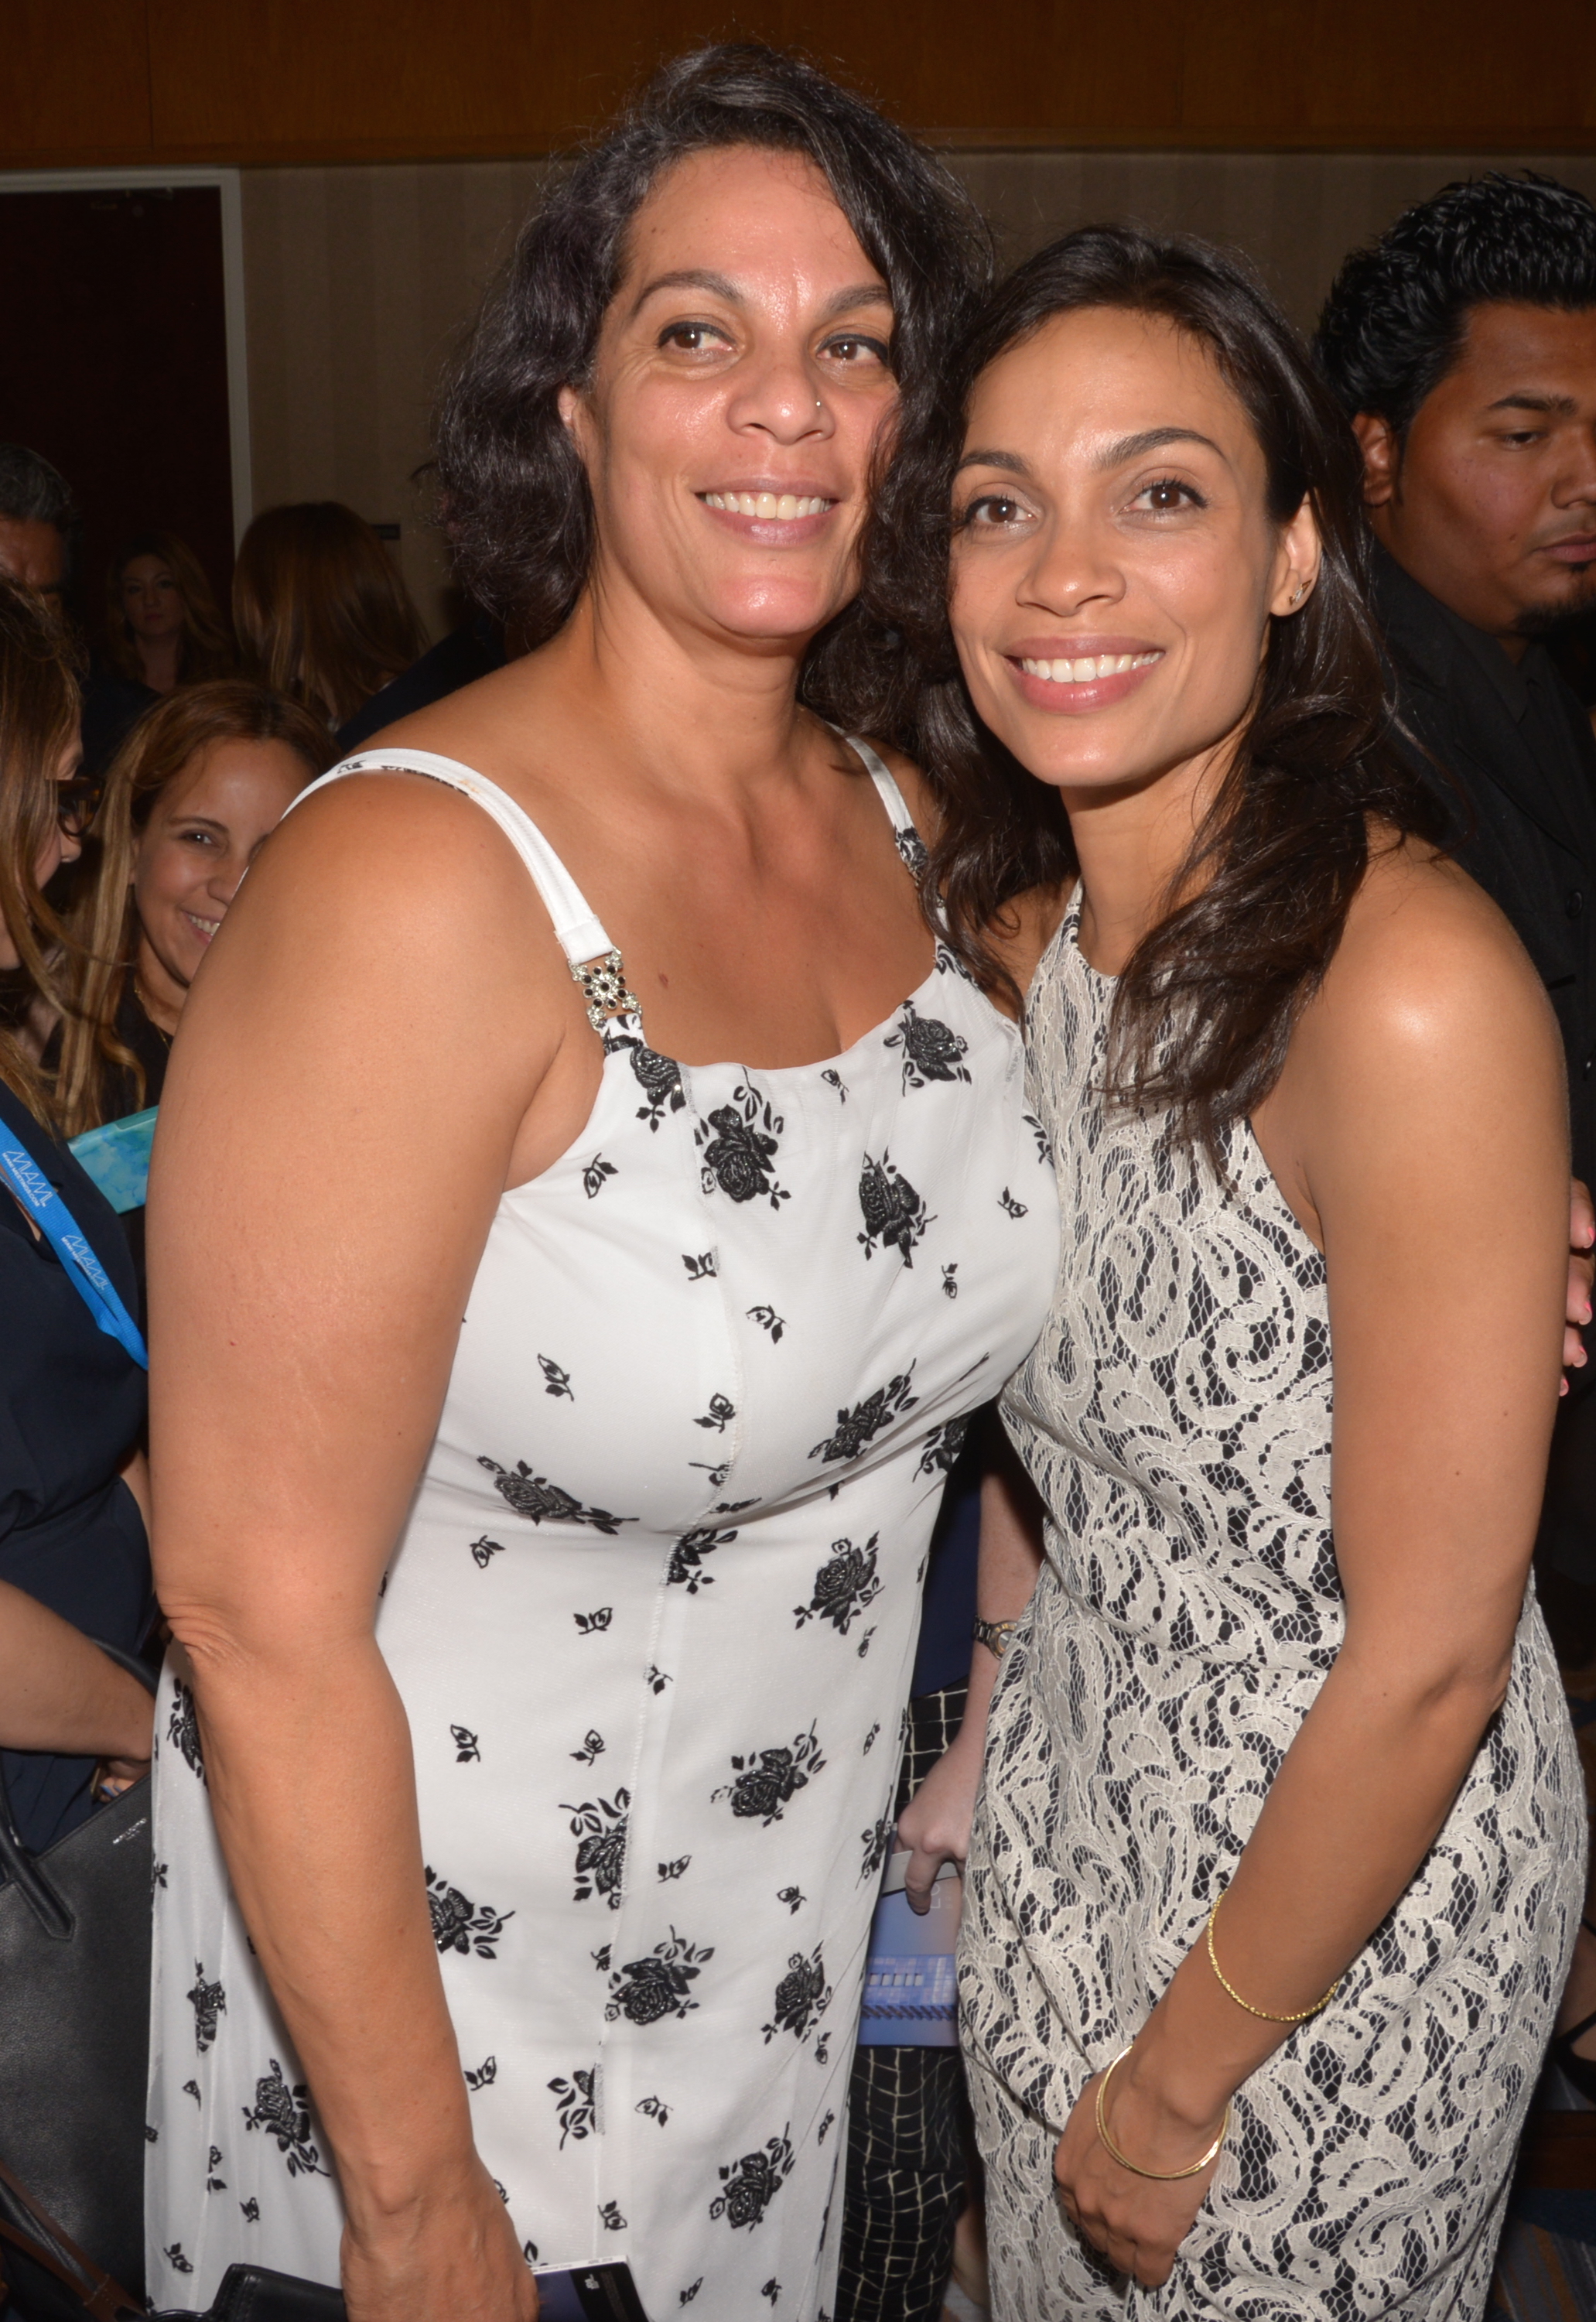 Isabel Celeste and Rosario Dawson at Hotel intercontinental on April 6, 2016, in Miami, Florida. | Source: Getty Images